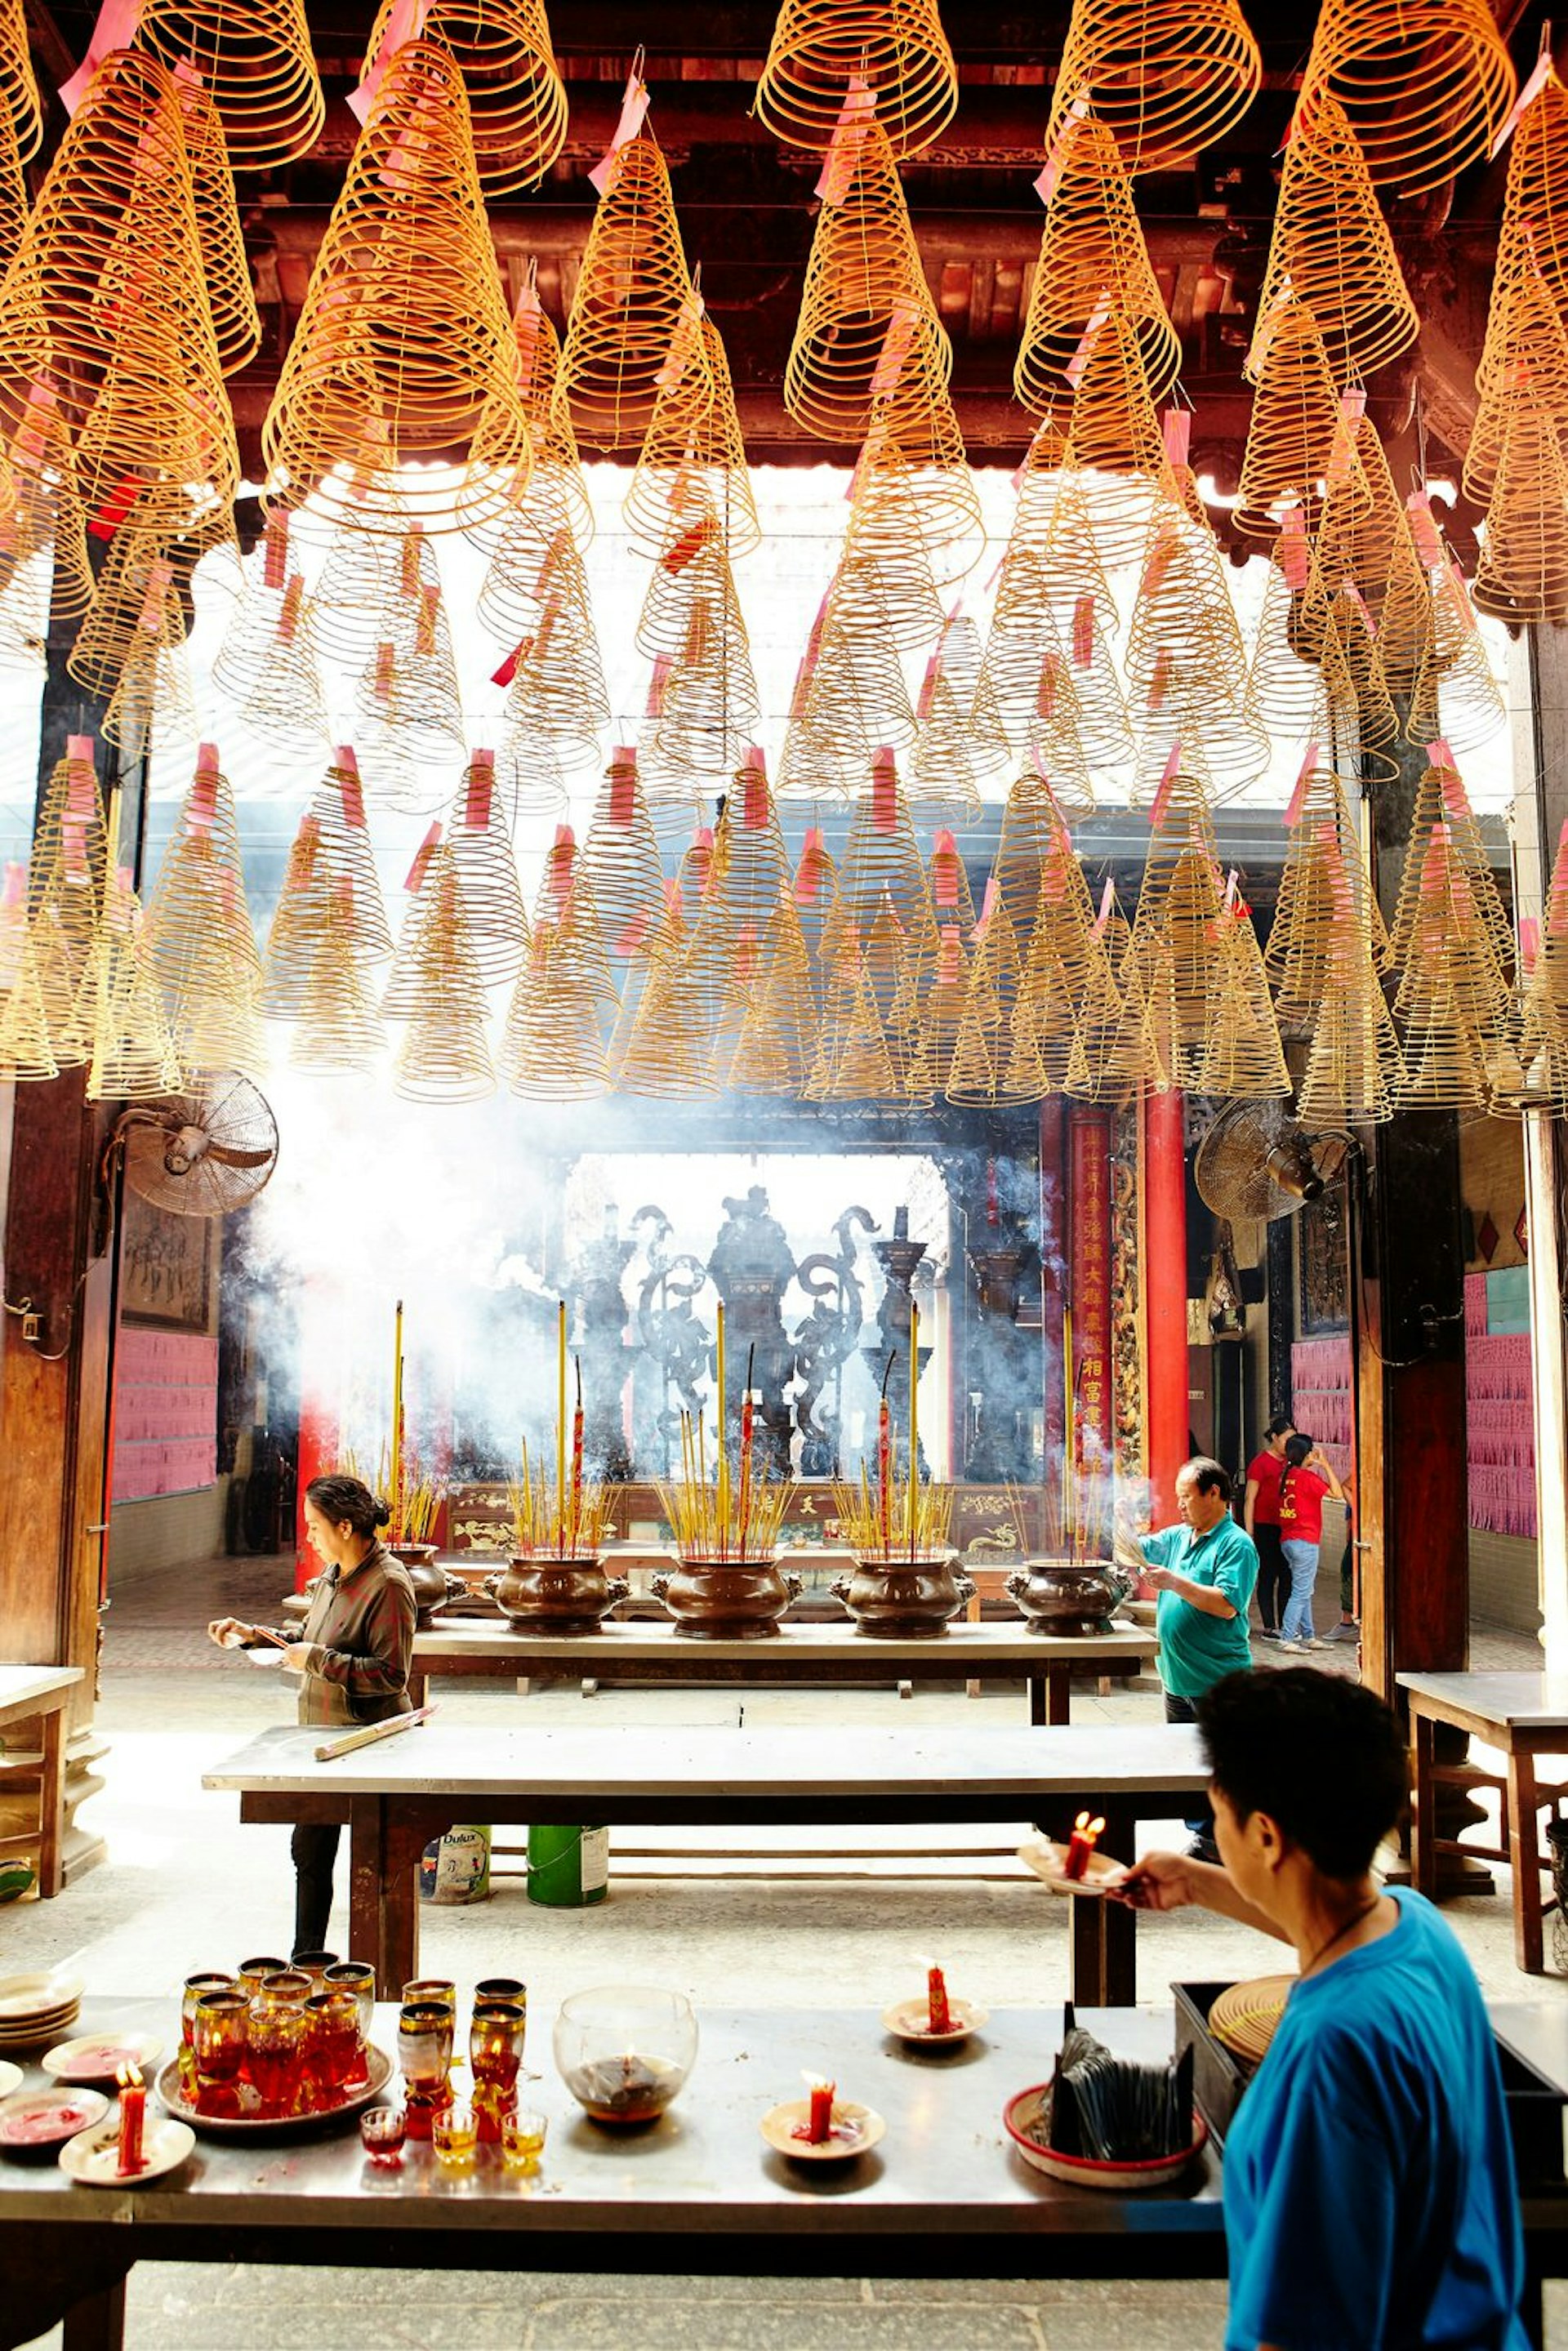 Large cone-shaped coils of incense hang from the ceiling of Thien Hau Pagoda, incense sticks give off smoke, while a visitor lights a candle below